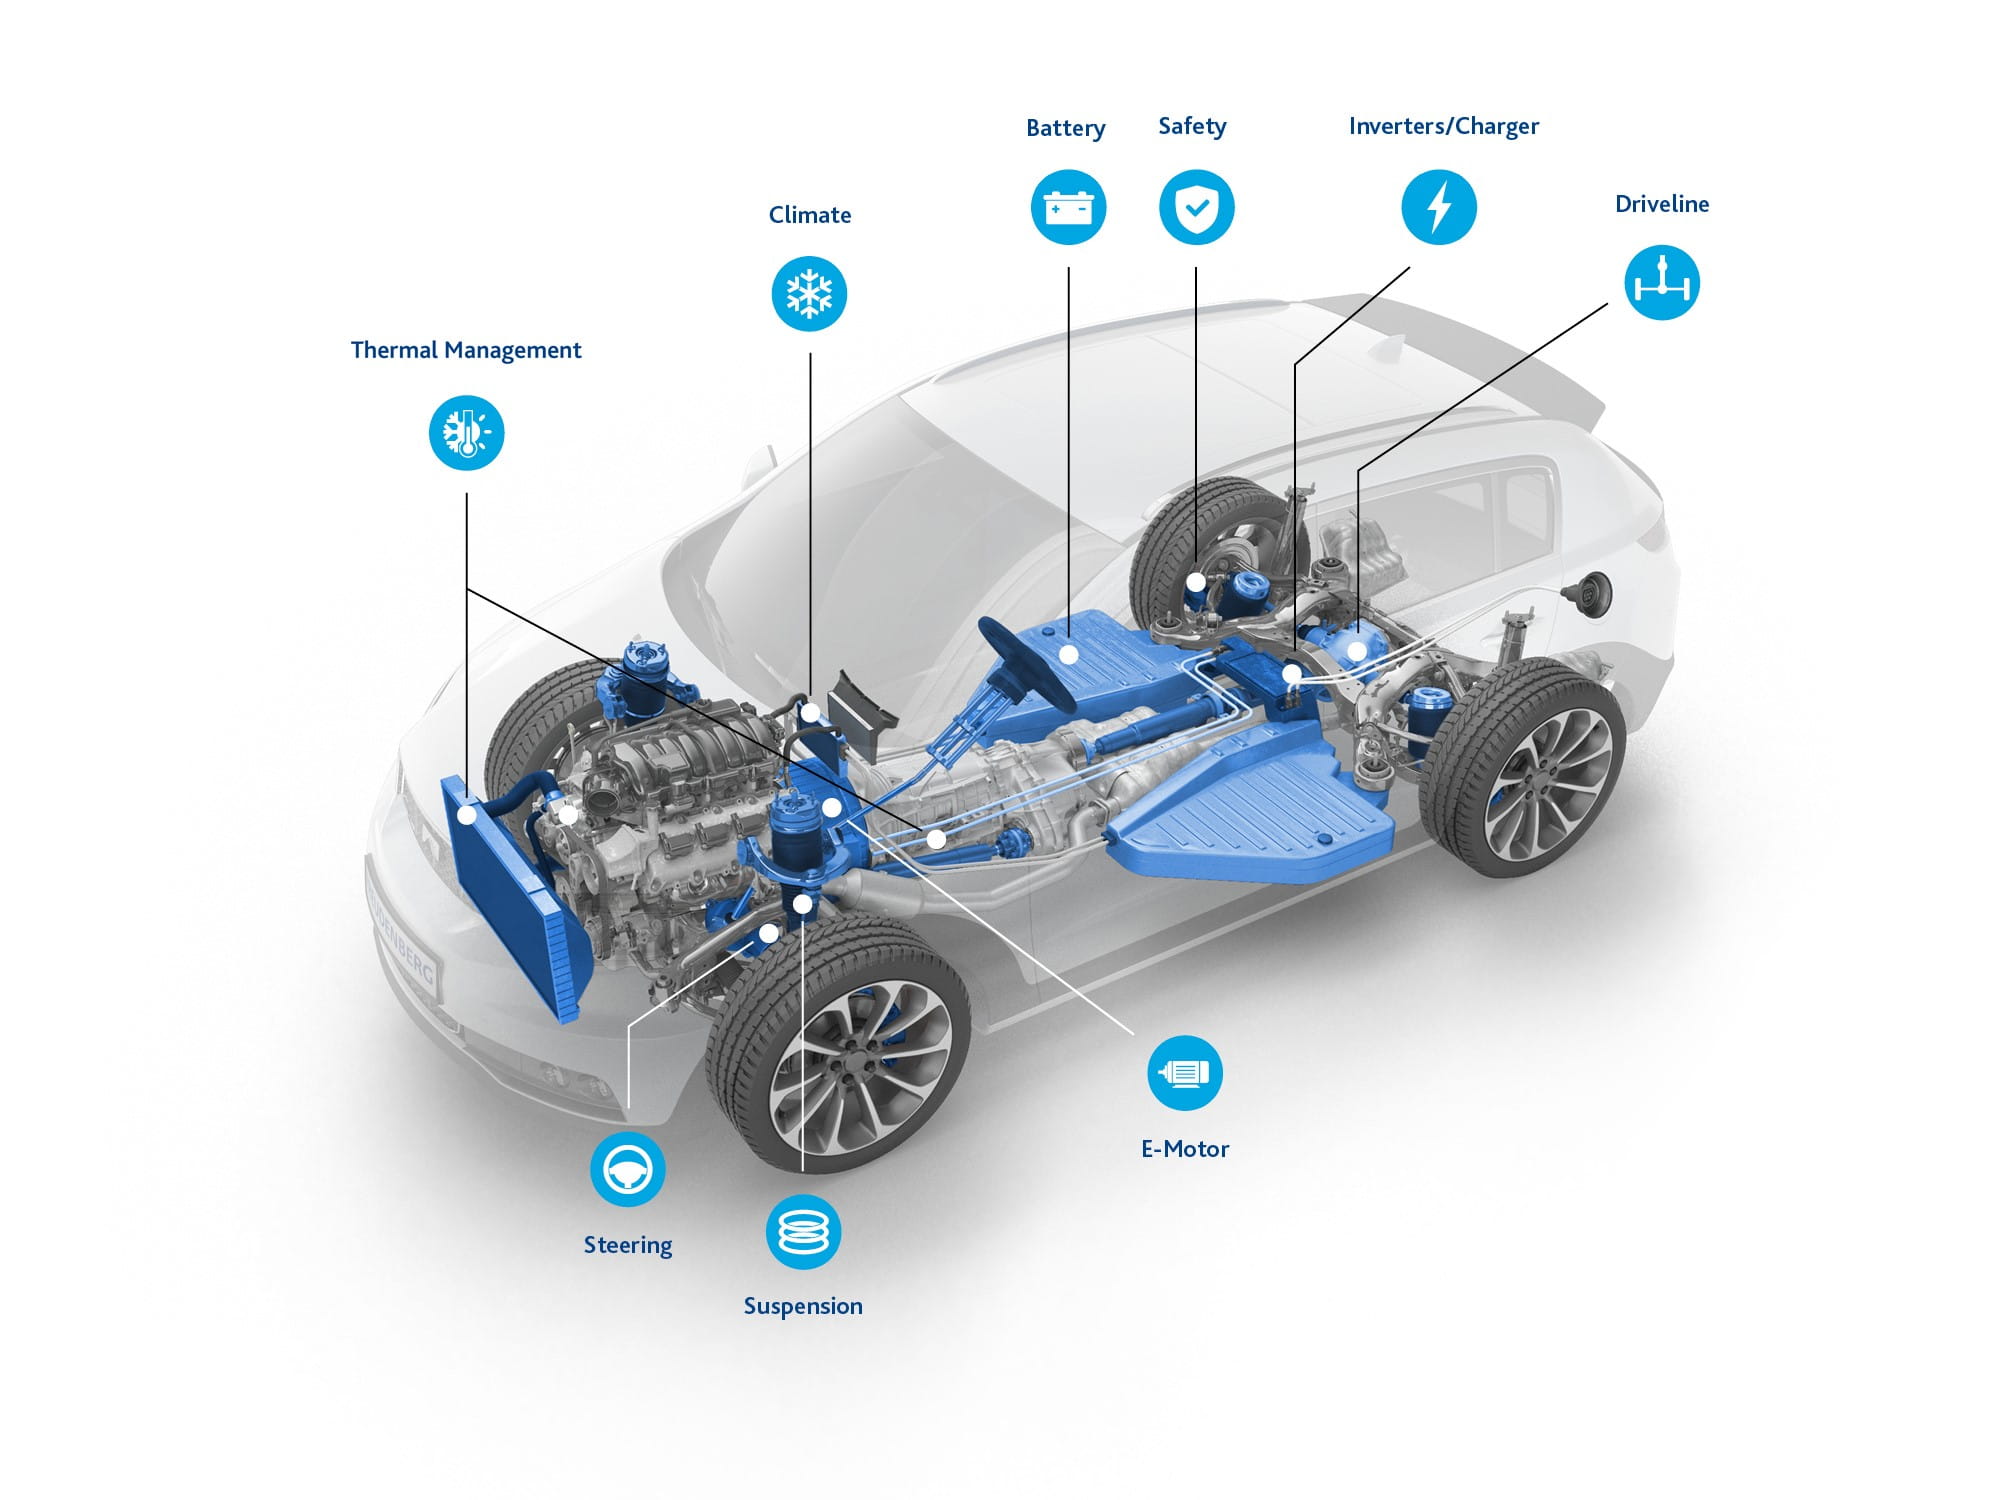 3D model of an SUV with explanation of the individual components